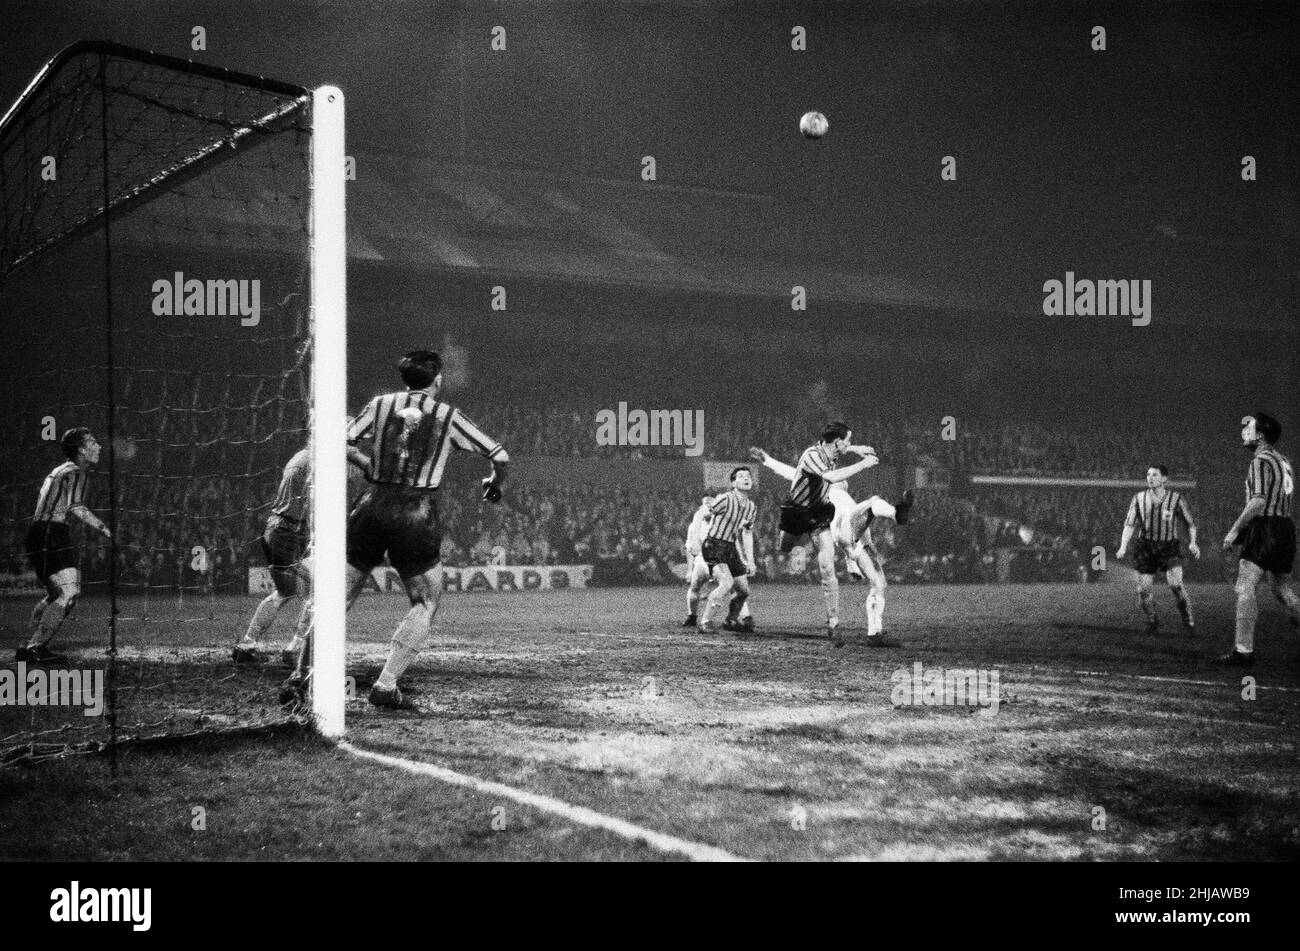 Crystal Palace played Real Madrid at Selhurst Park, on the night of 18th April 1962, to mark the new floodlighting system. The final score was Crystal Palace 3 Real Madrid 4. Stock Photo